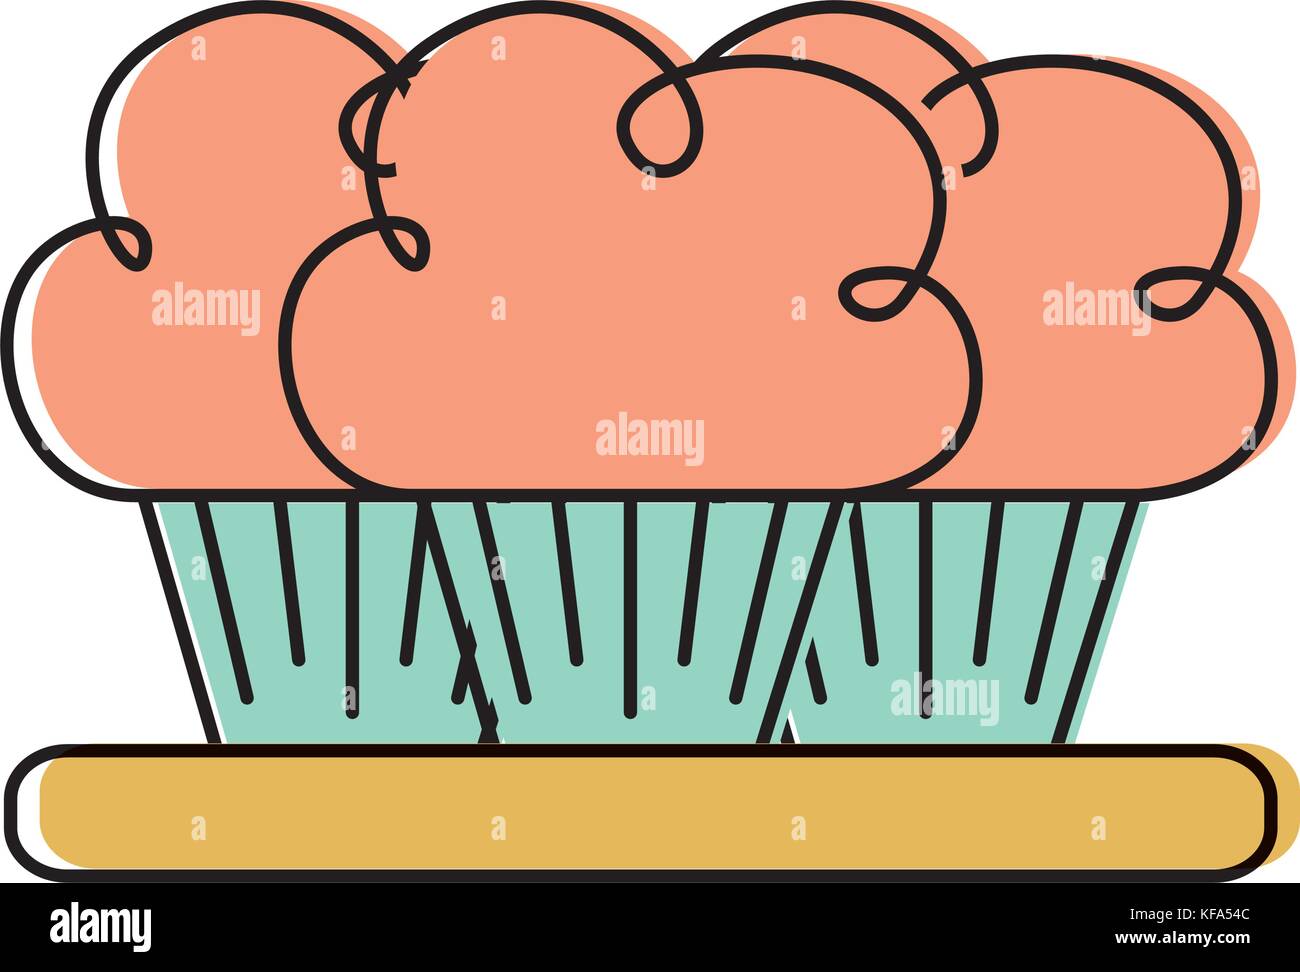 birthday three cupcake on the plate serving party dessert Stock Vector